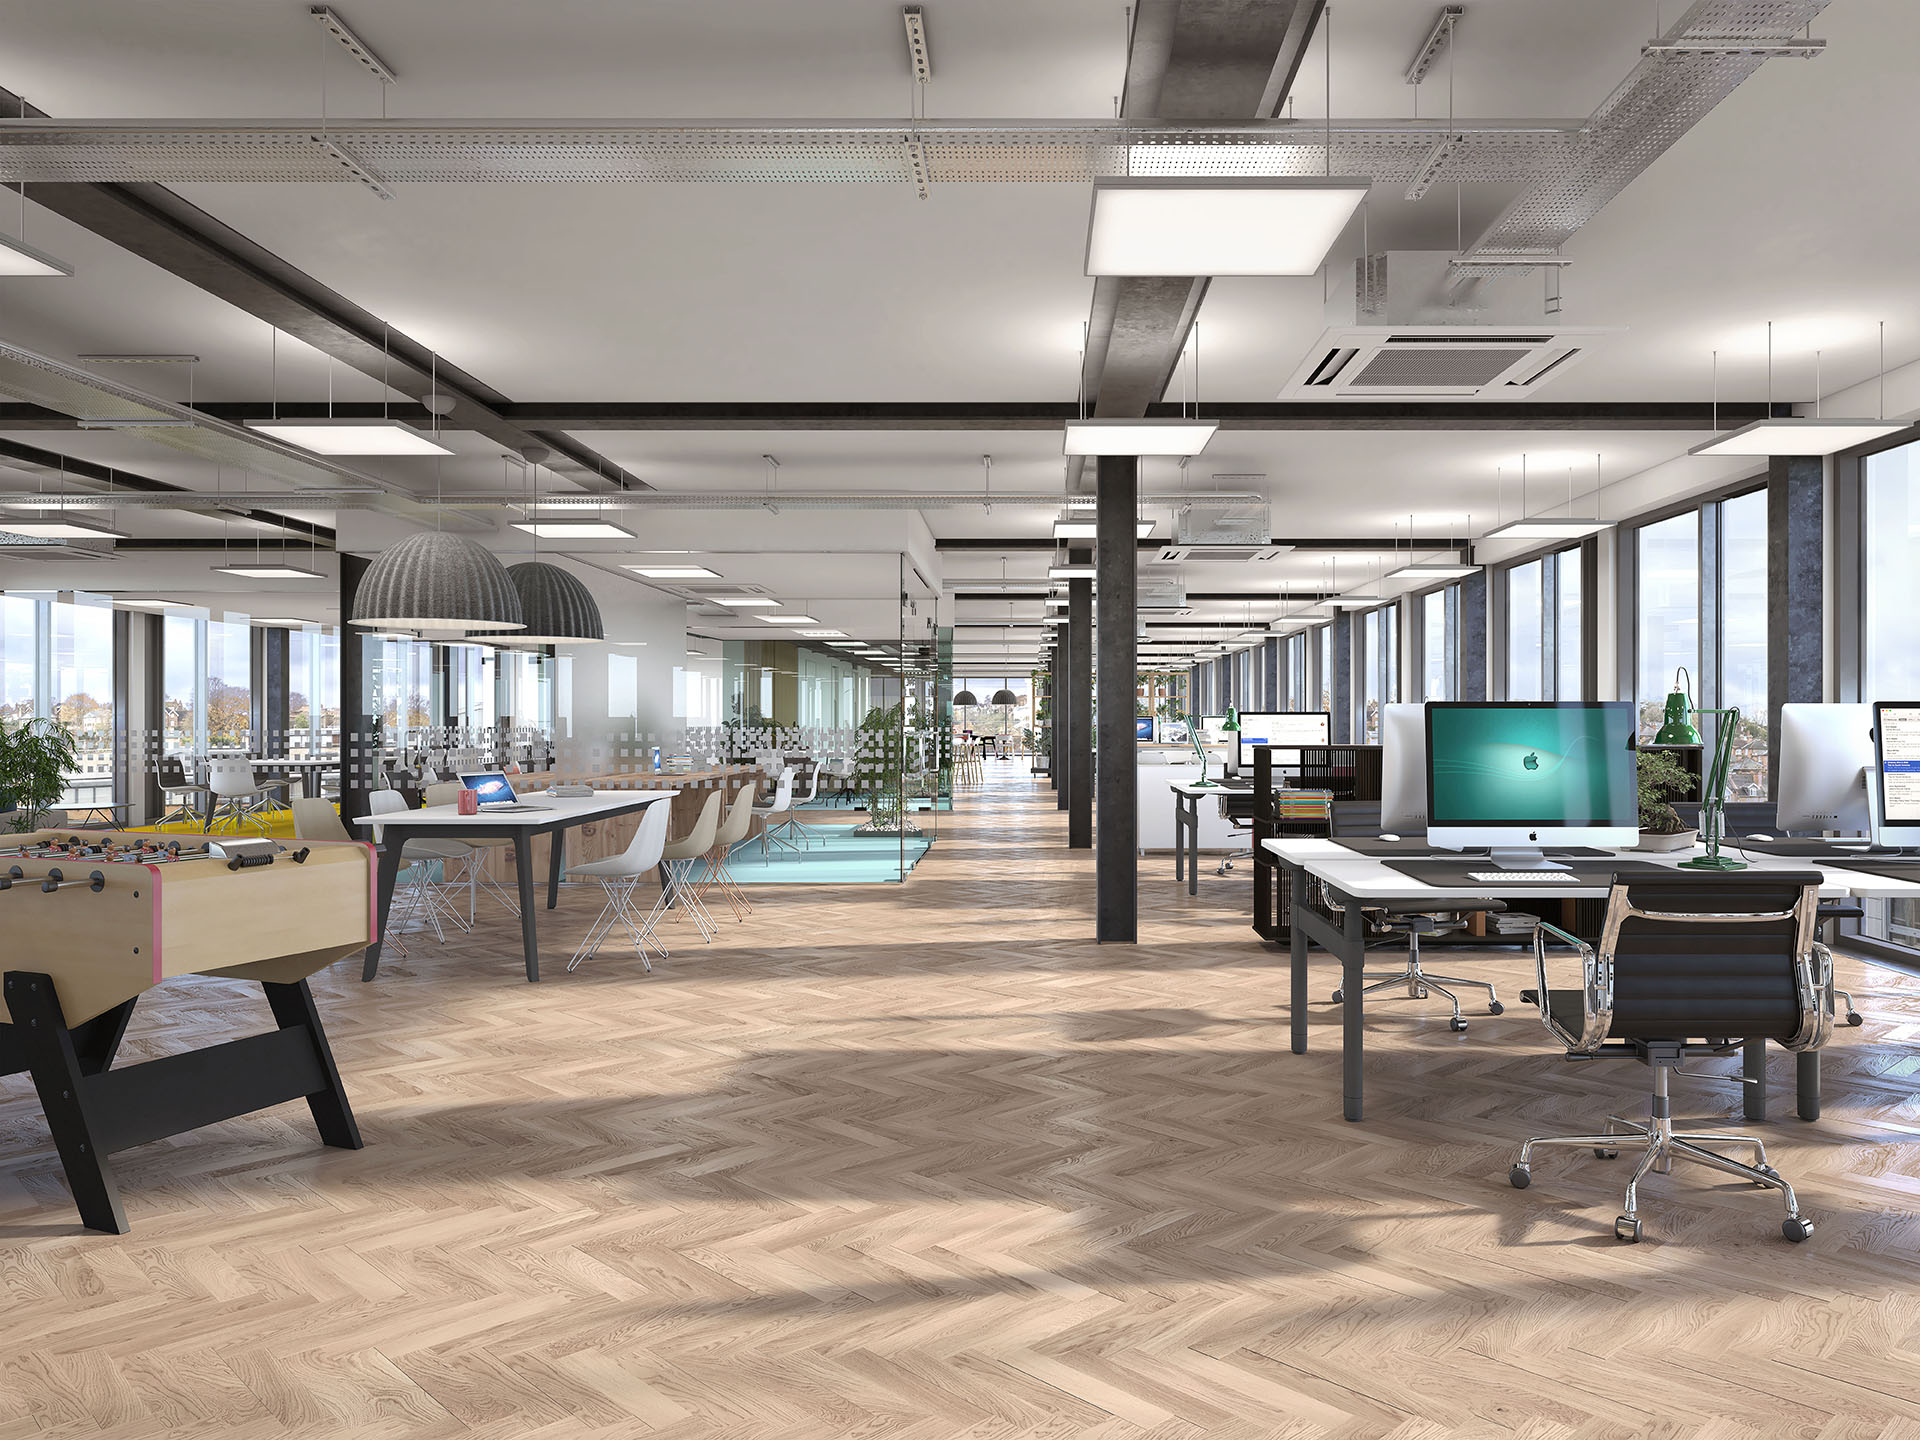 Connaught House Office 255 High Street Creative Office workplace exposed services wellbeing proptech lighting